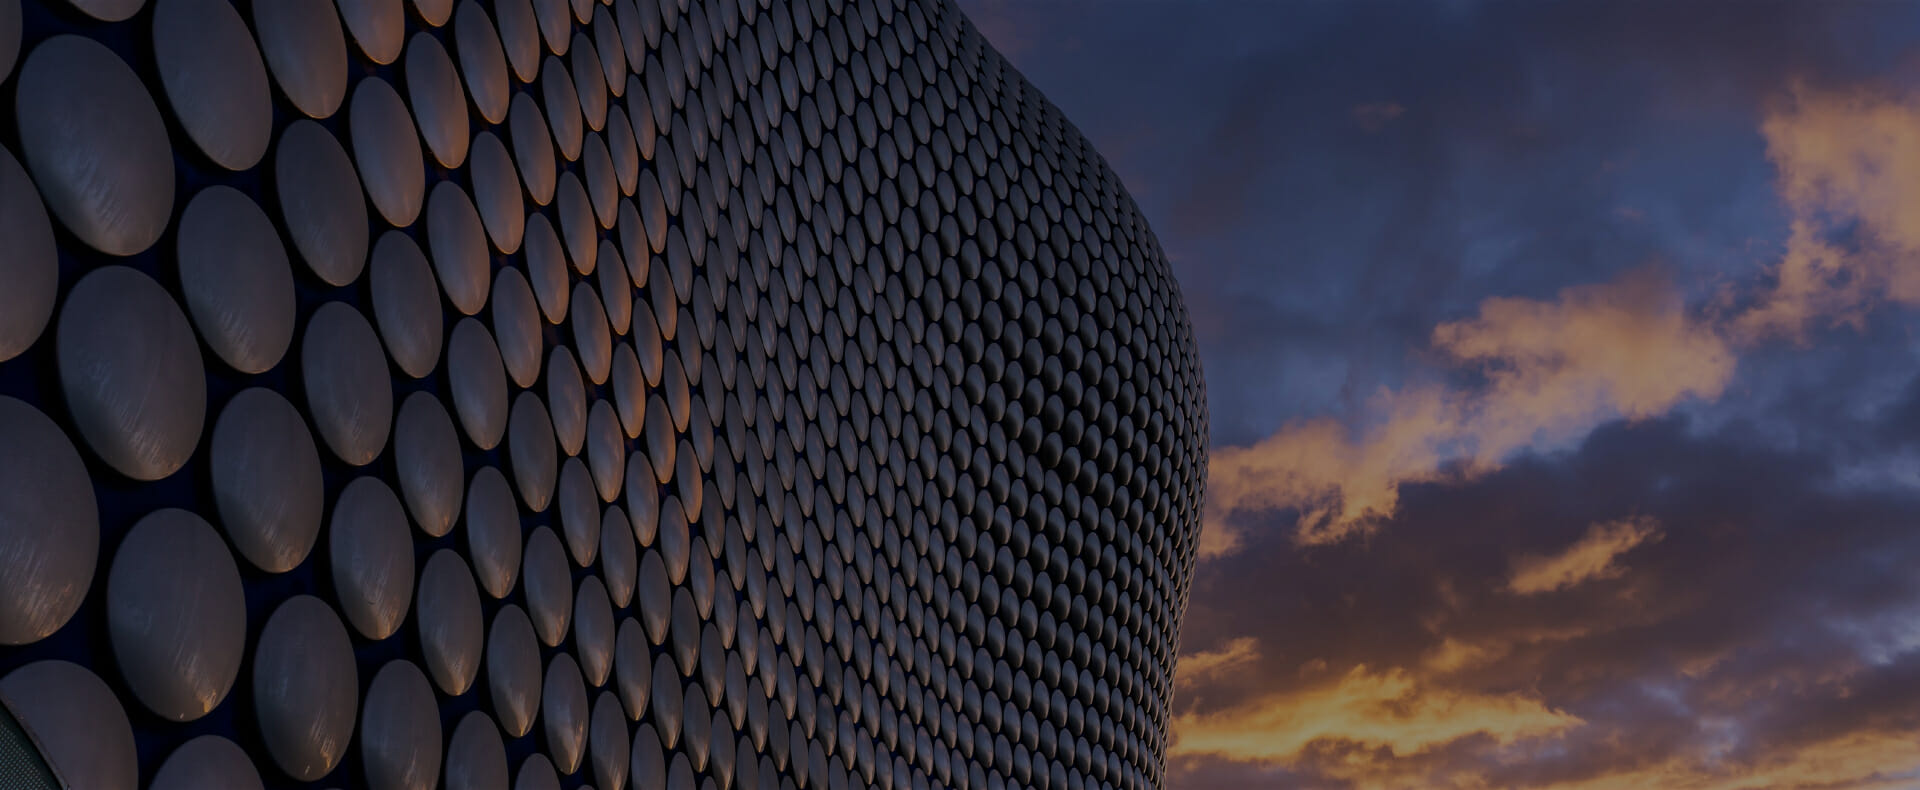 selfridges building in birmingham city with a cloudy sky